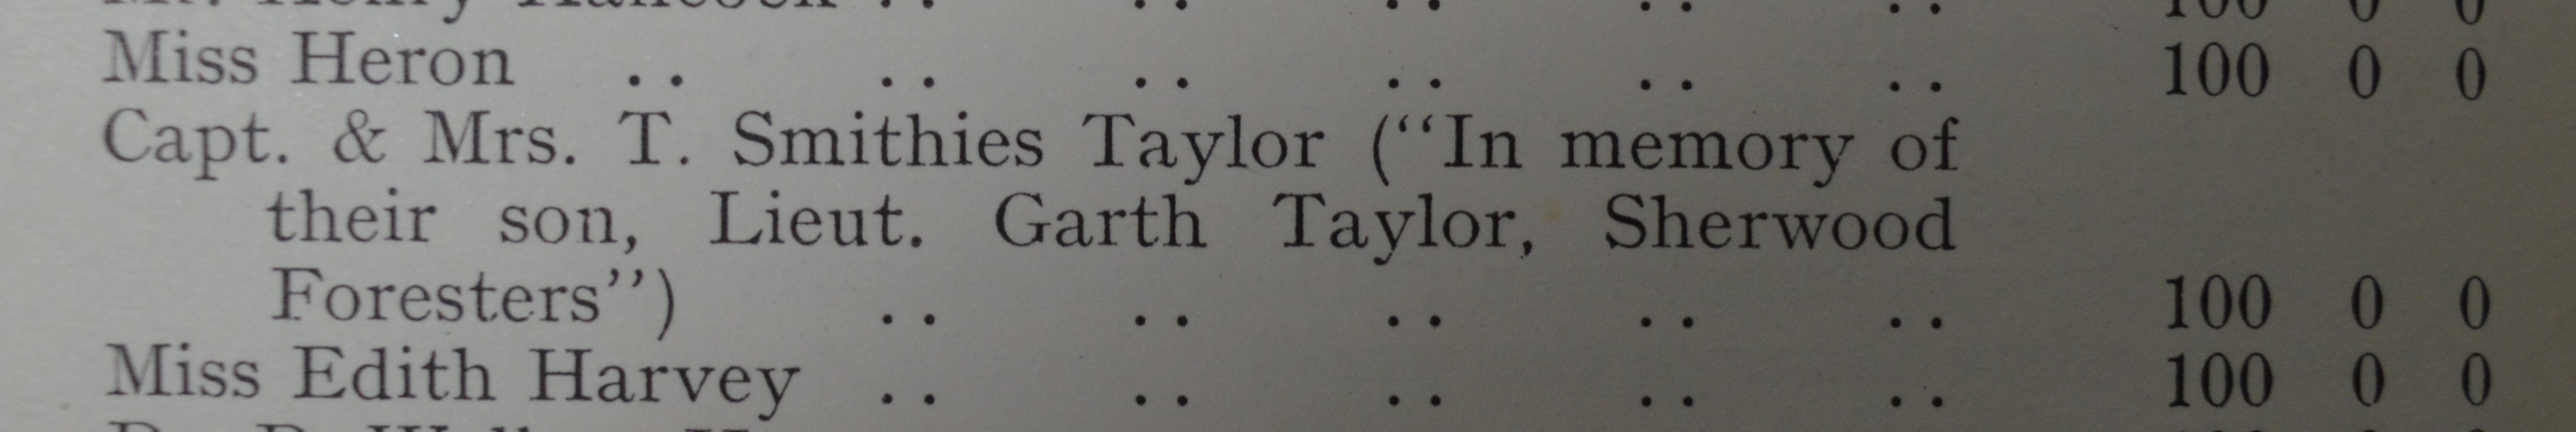 Record of donation by Capt. & Mrs. T. Smithies Taylor in memory of their son (ULA P/AR1)